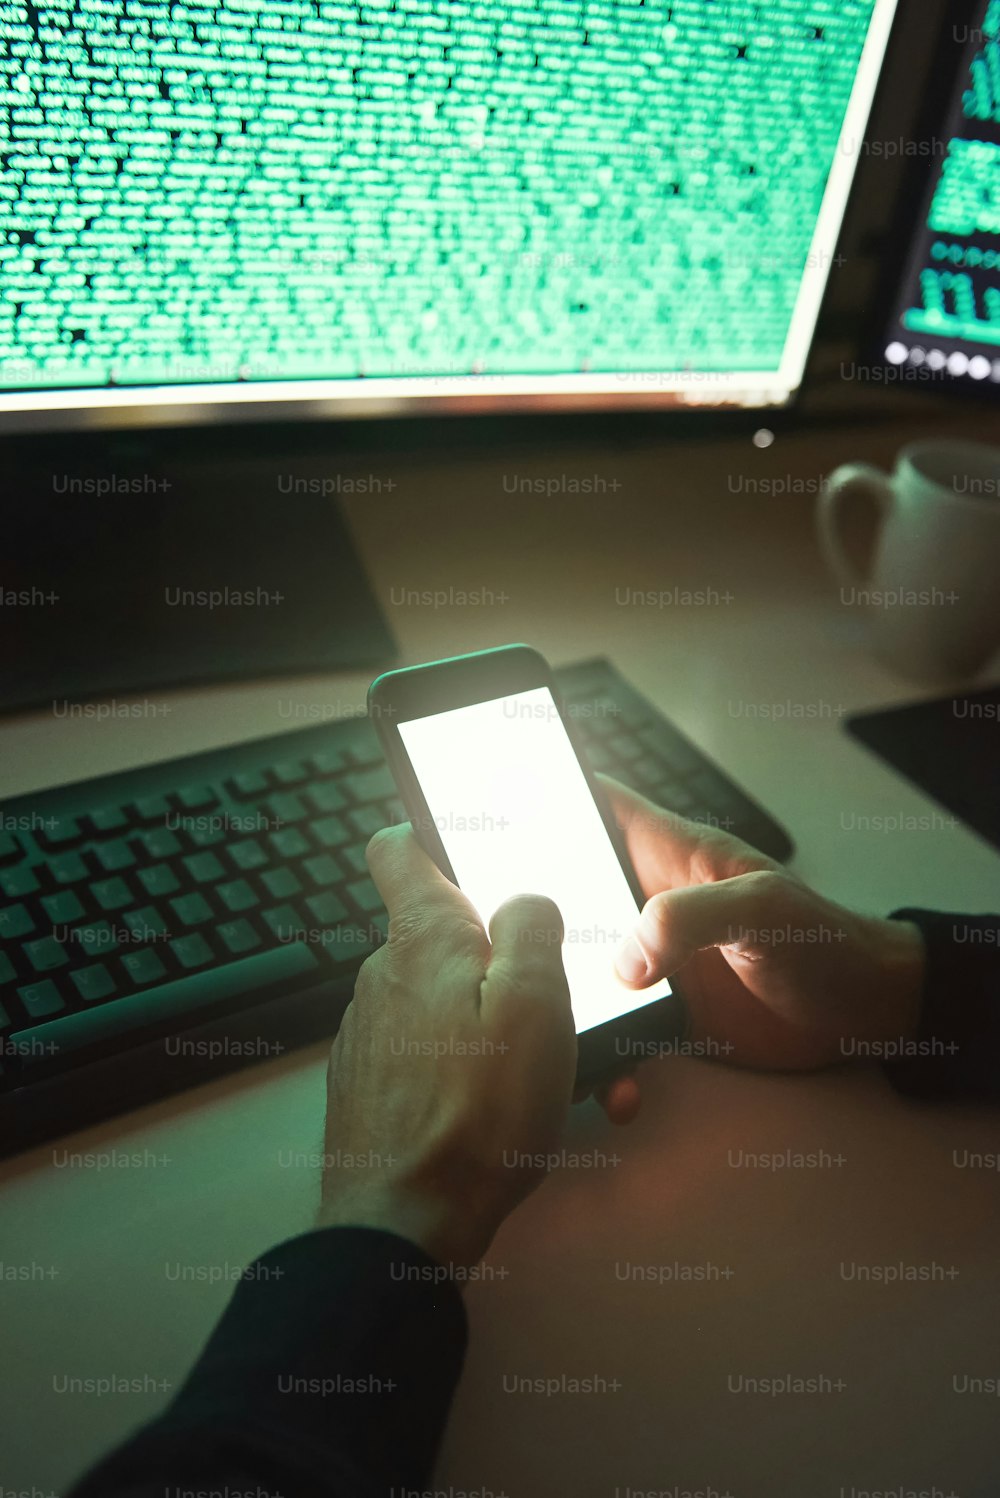 Professional Hacker. Close-up photo of young hacker in black hoodie using his smartphone for stealing data while sitting in dark room. Binary code. Cyber attack. Cyber security